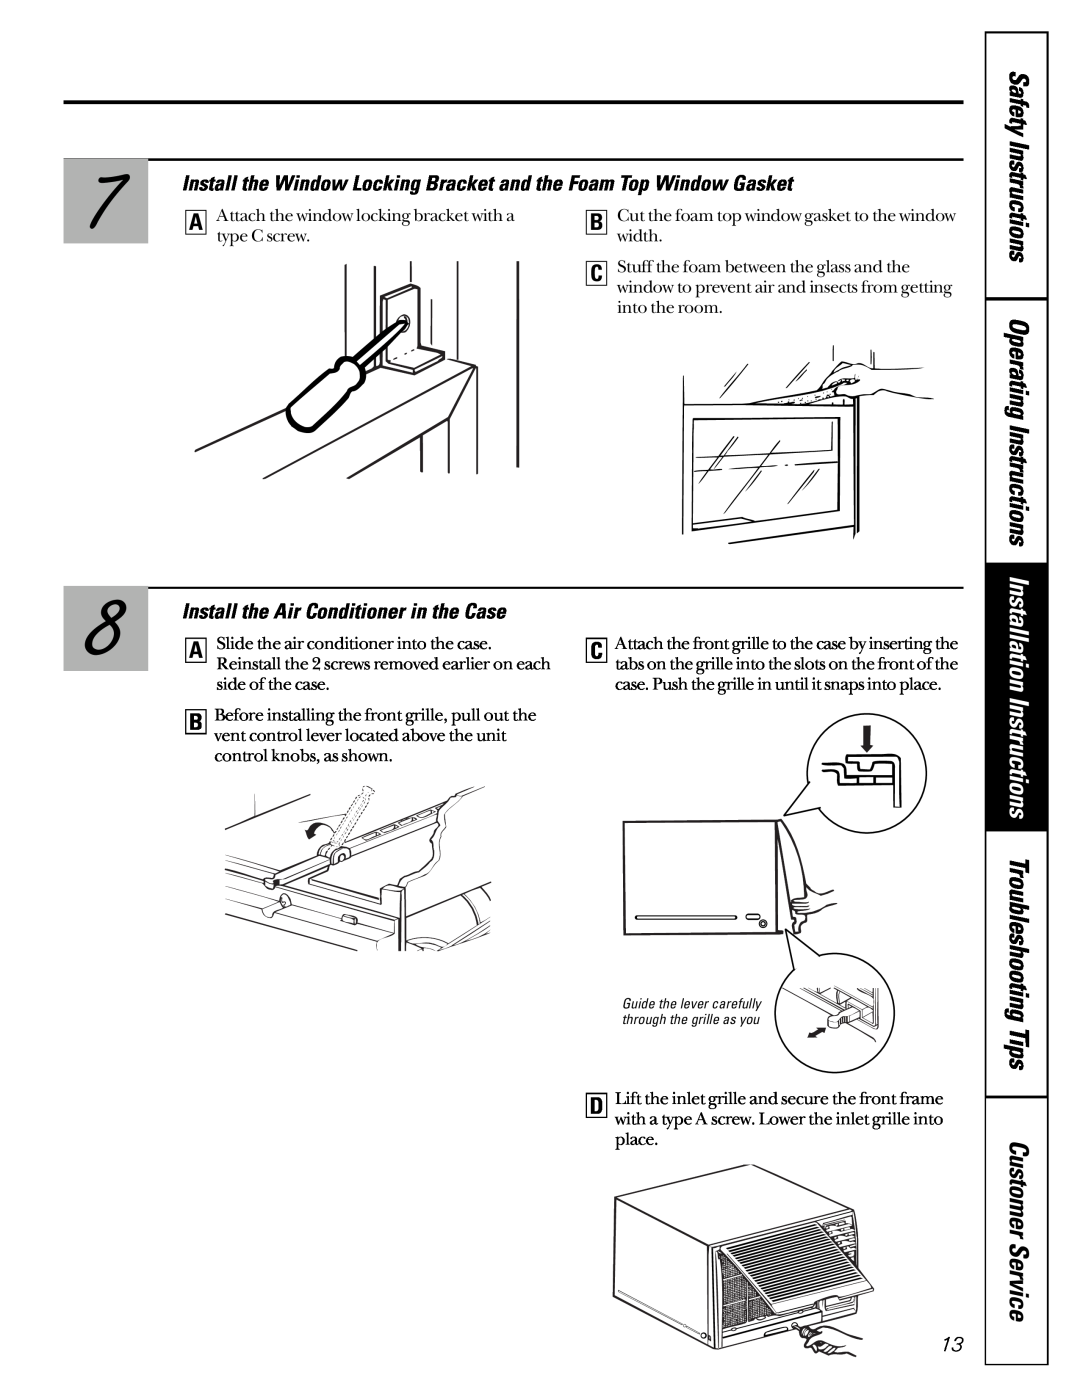 GE 3828A Safety Instructions Operating Instructions, Install the Air Conditioner in the Case, Tips Customer Service 